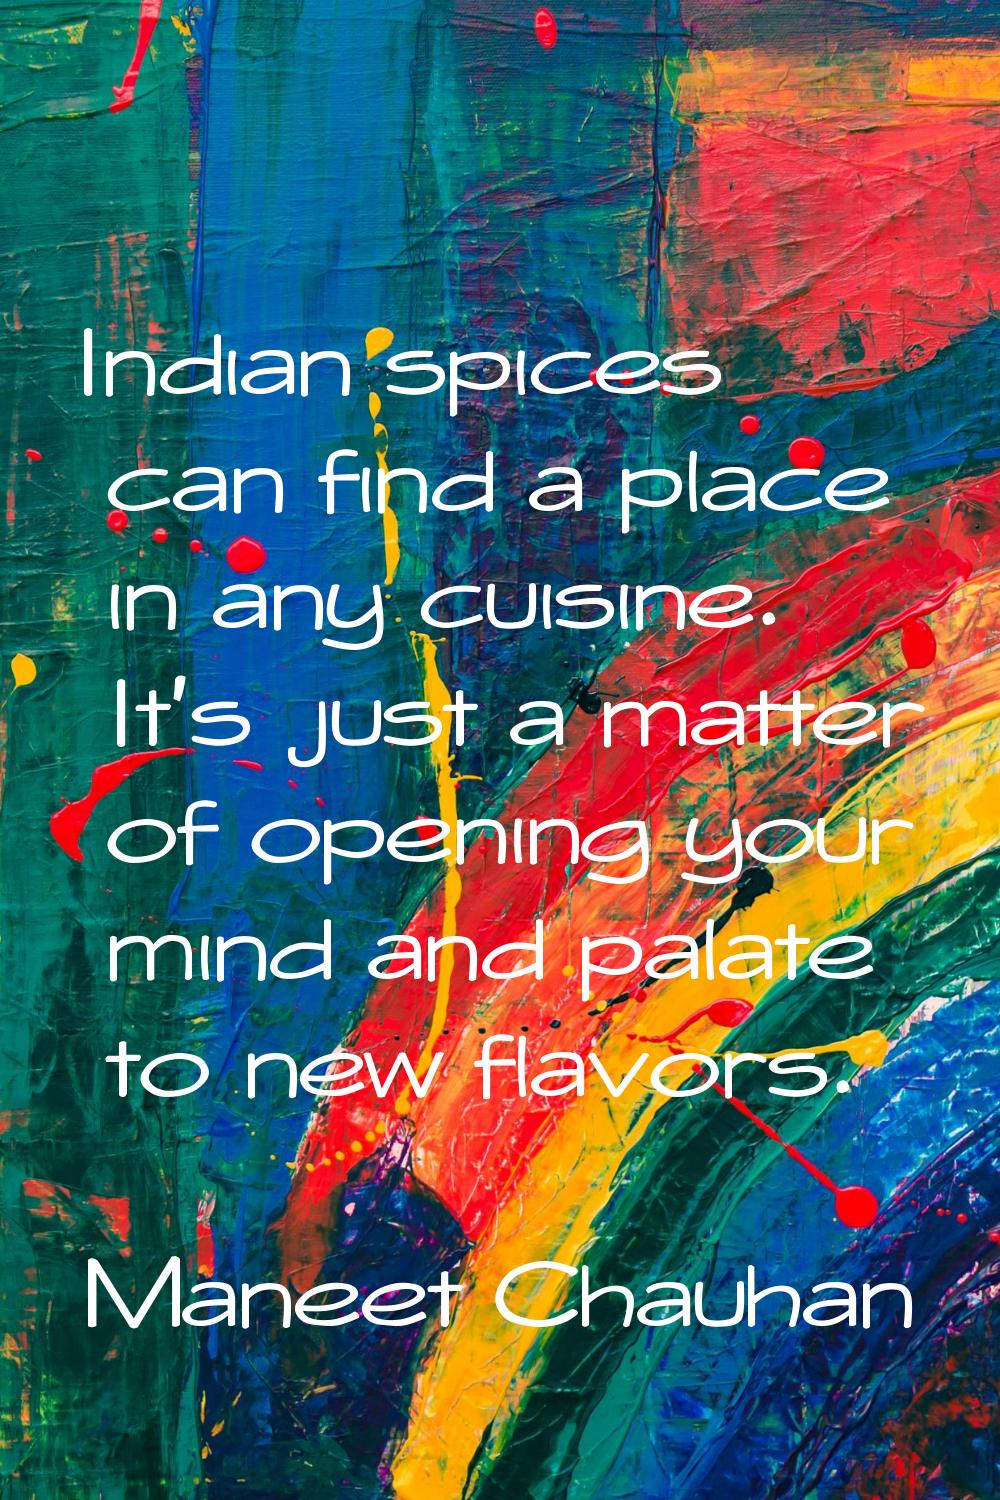 Indian spices can find a place in any cuisine. It's just a matter of opening your mind and palate t